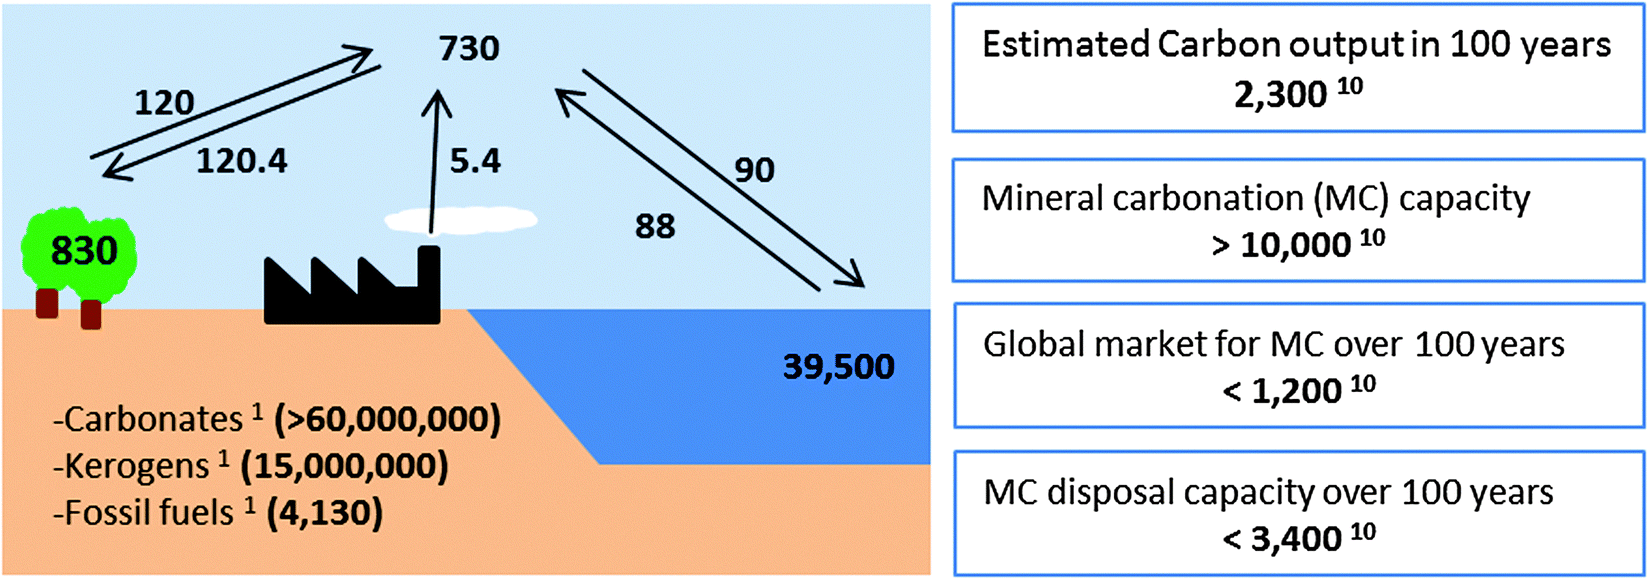 A Review Of Mineral Carbonation Technologies To Sequester